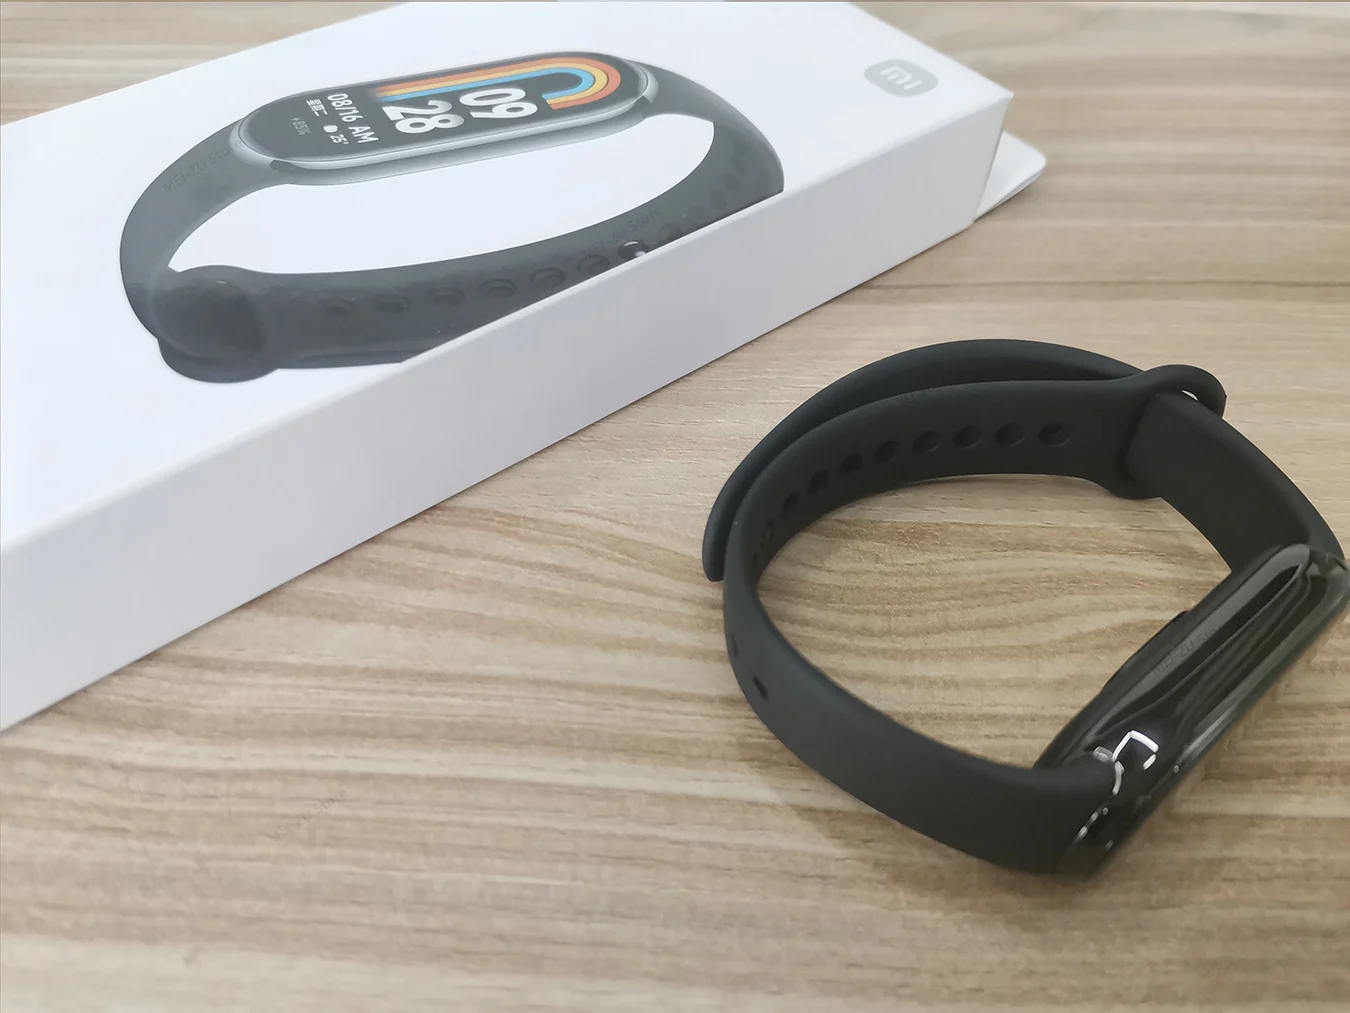 Xiaomi Band 8 Global Version, 1.62 AMOLED, Ultra Long Battery Life, 16 Days  Smart Bracelet M4 Band With 150+ Sport Modes From Mi668, $17.59